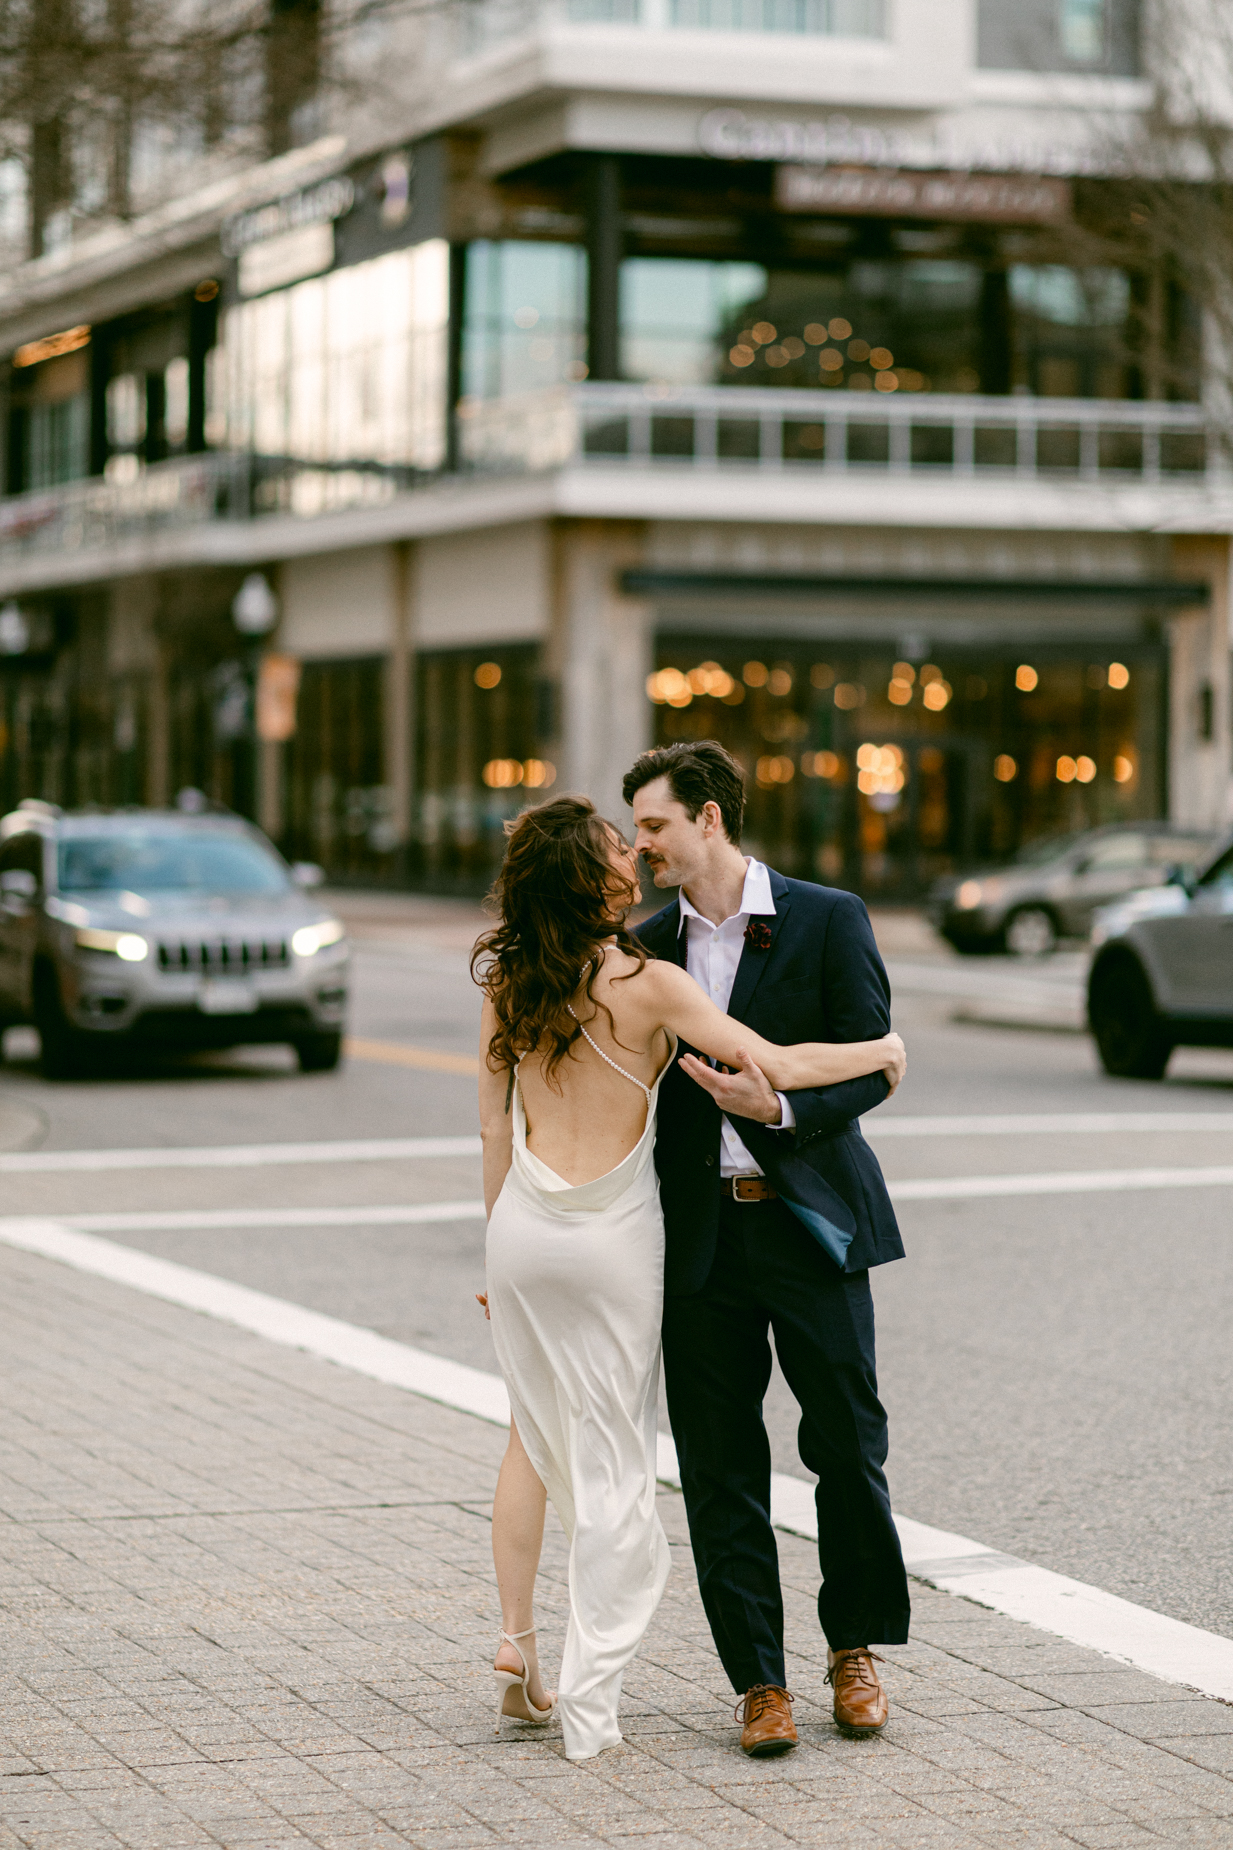 Engagement photography of a couple crossing the street at a crosswalk  taken by Virginia Beach Engagement photographers Glenn & Nadya